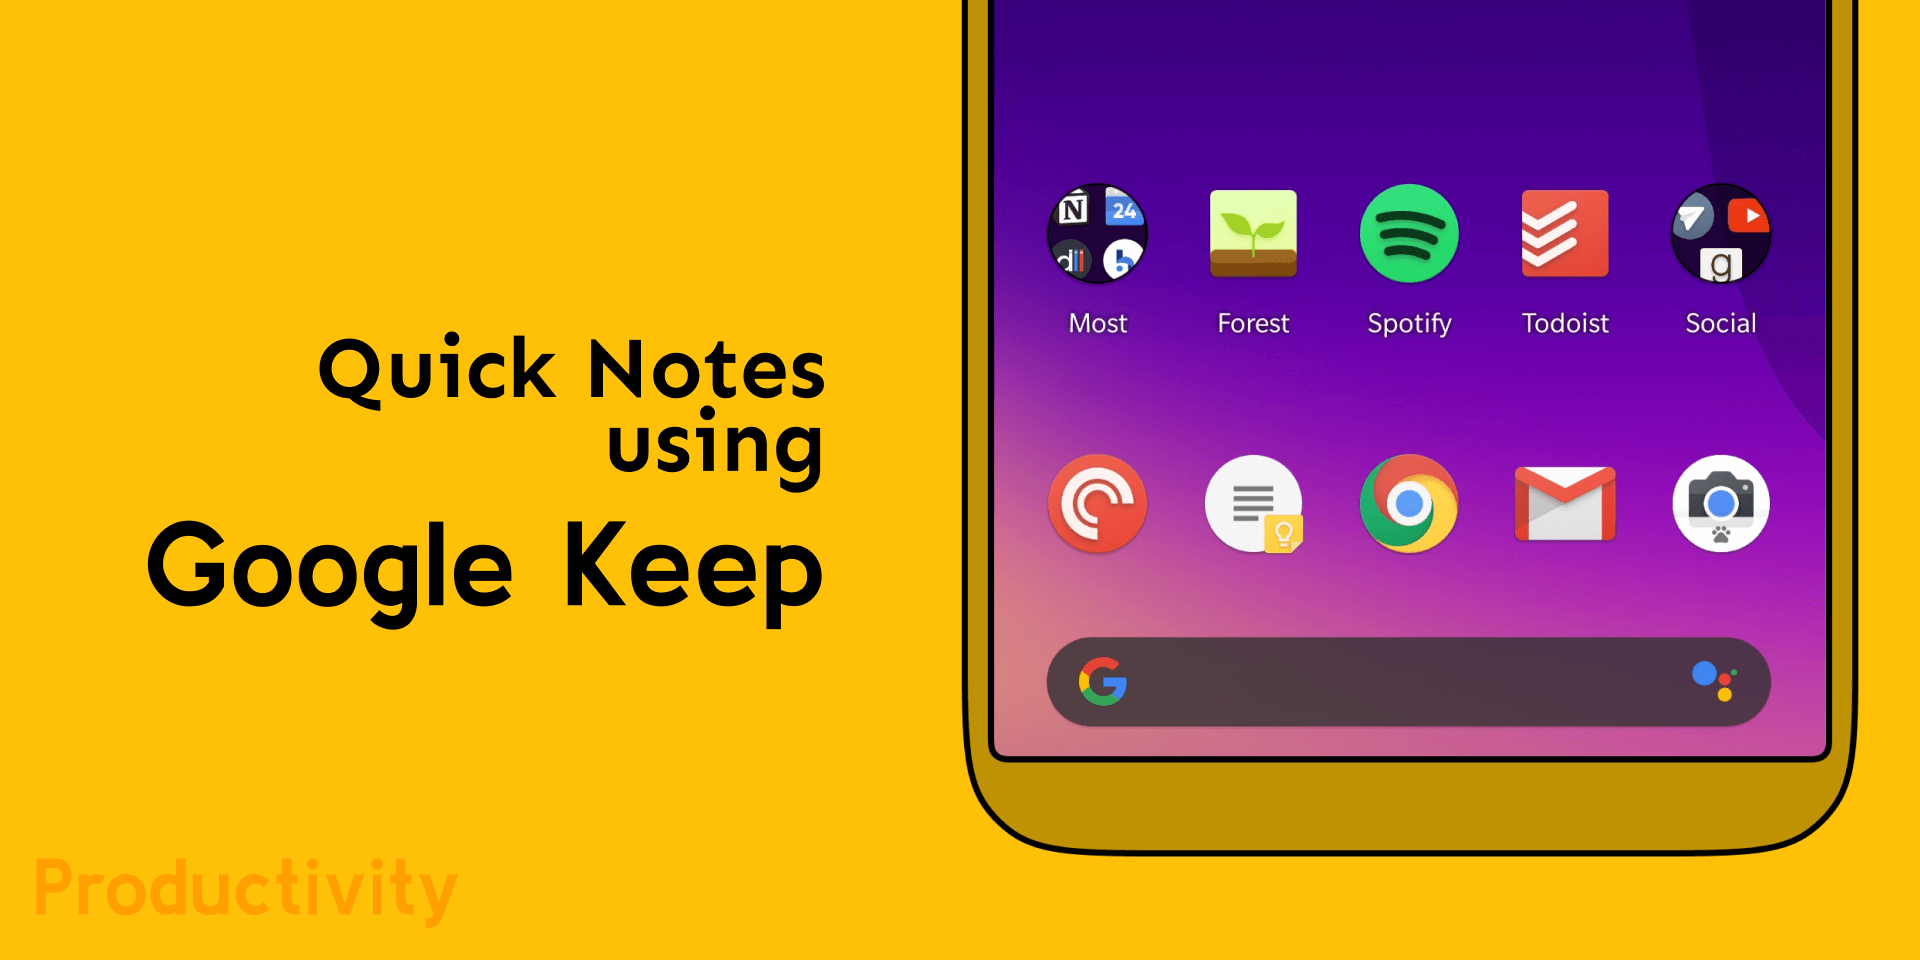 Quick note taking using Google Keep